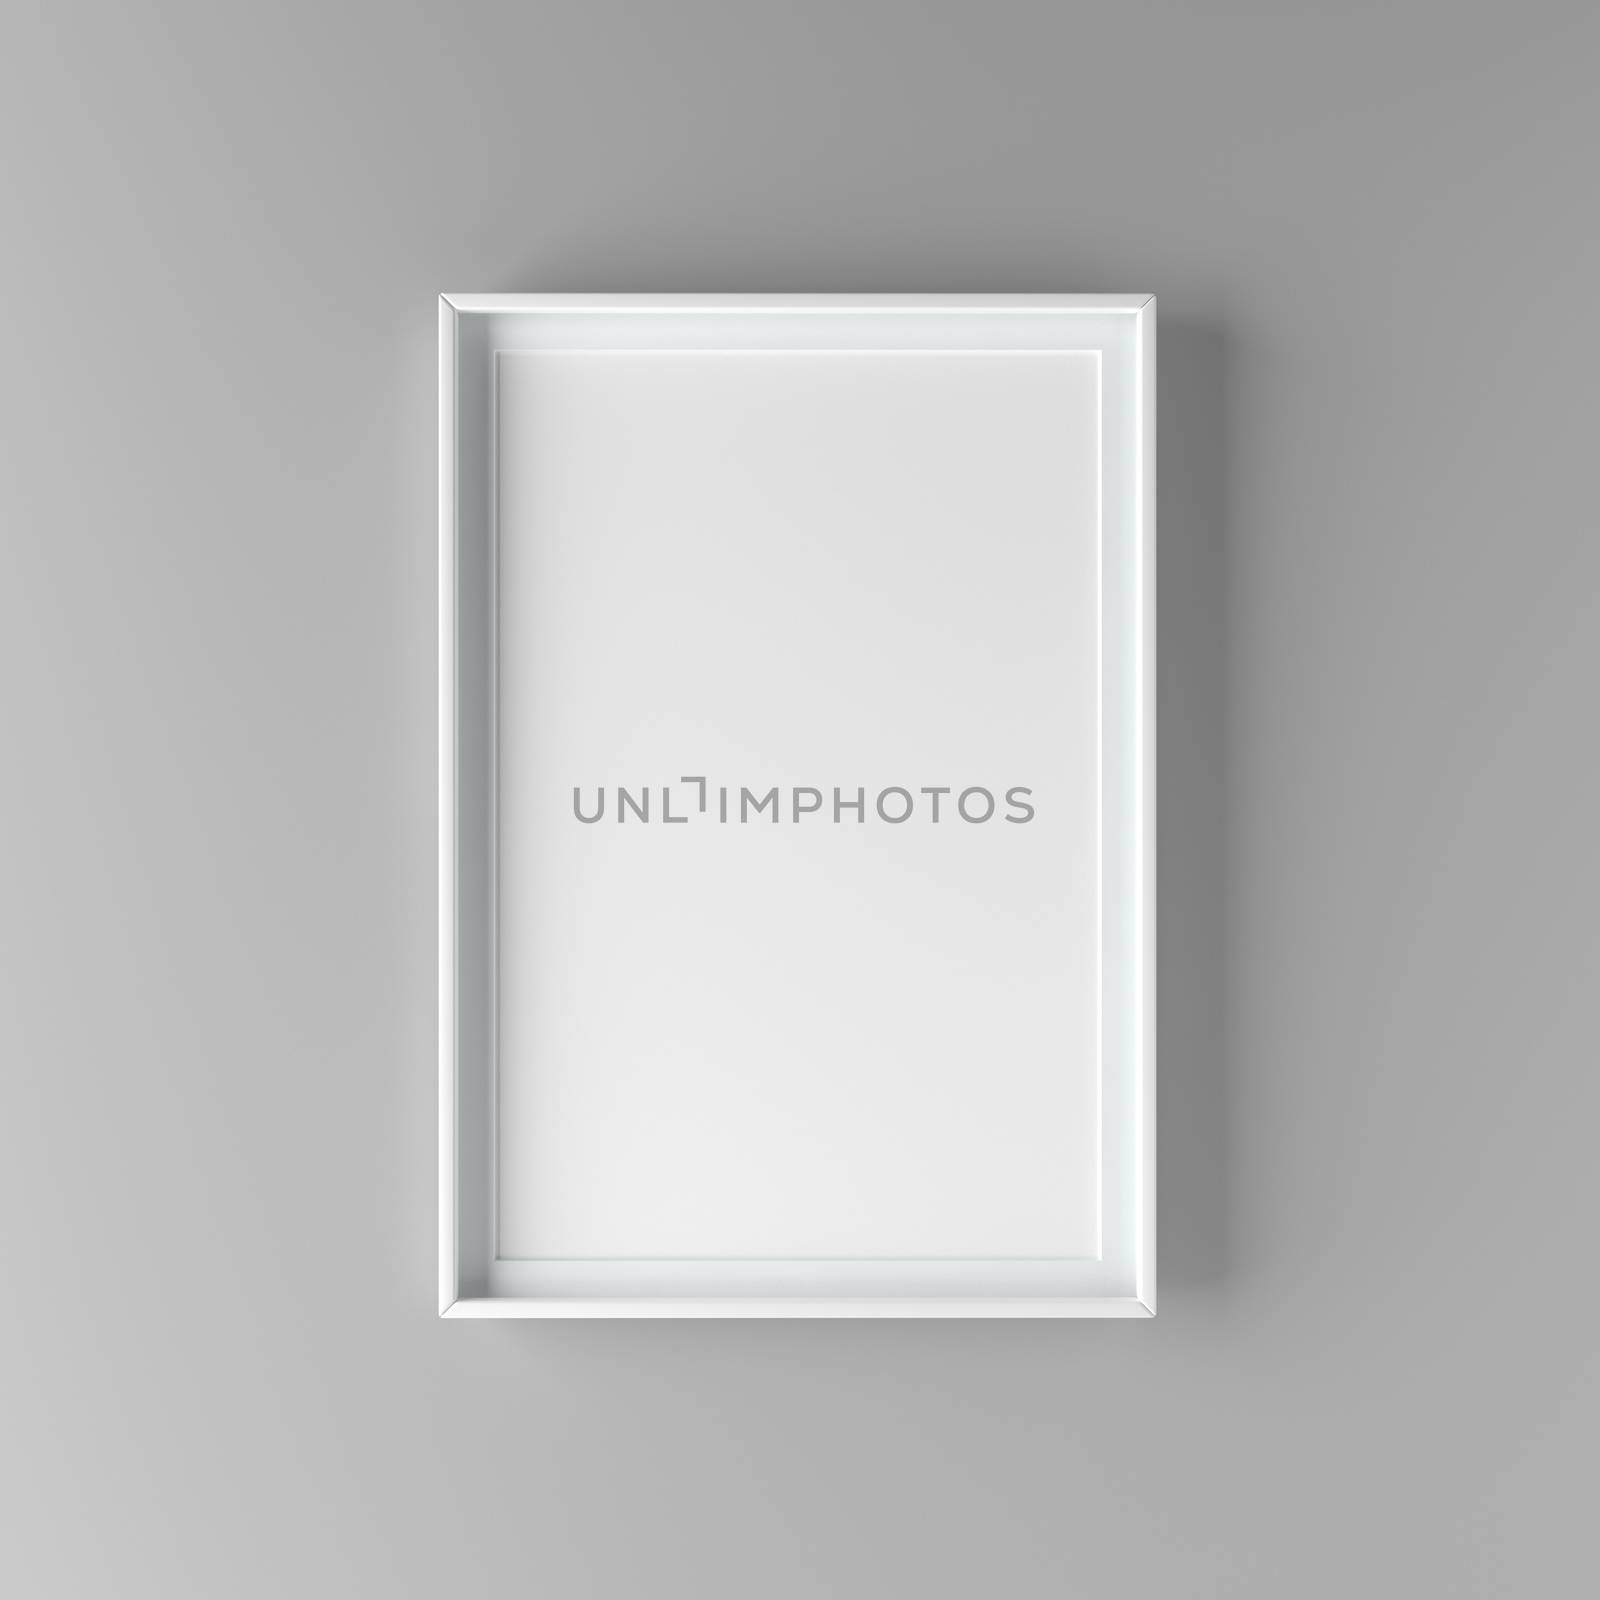 Elegant and minimalistic picture frame standing on gray wall by adamr